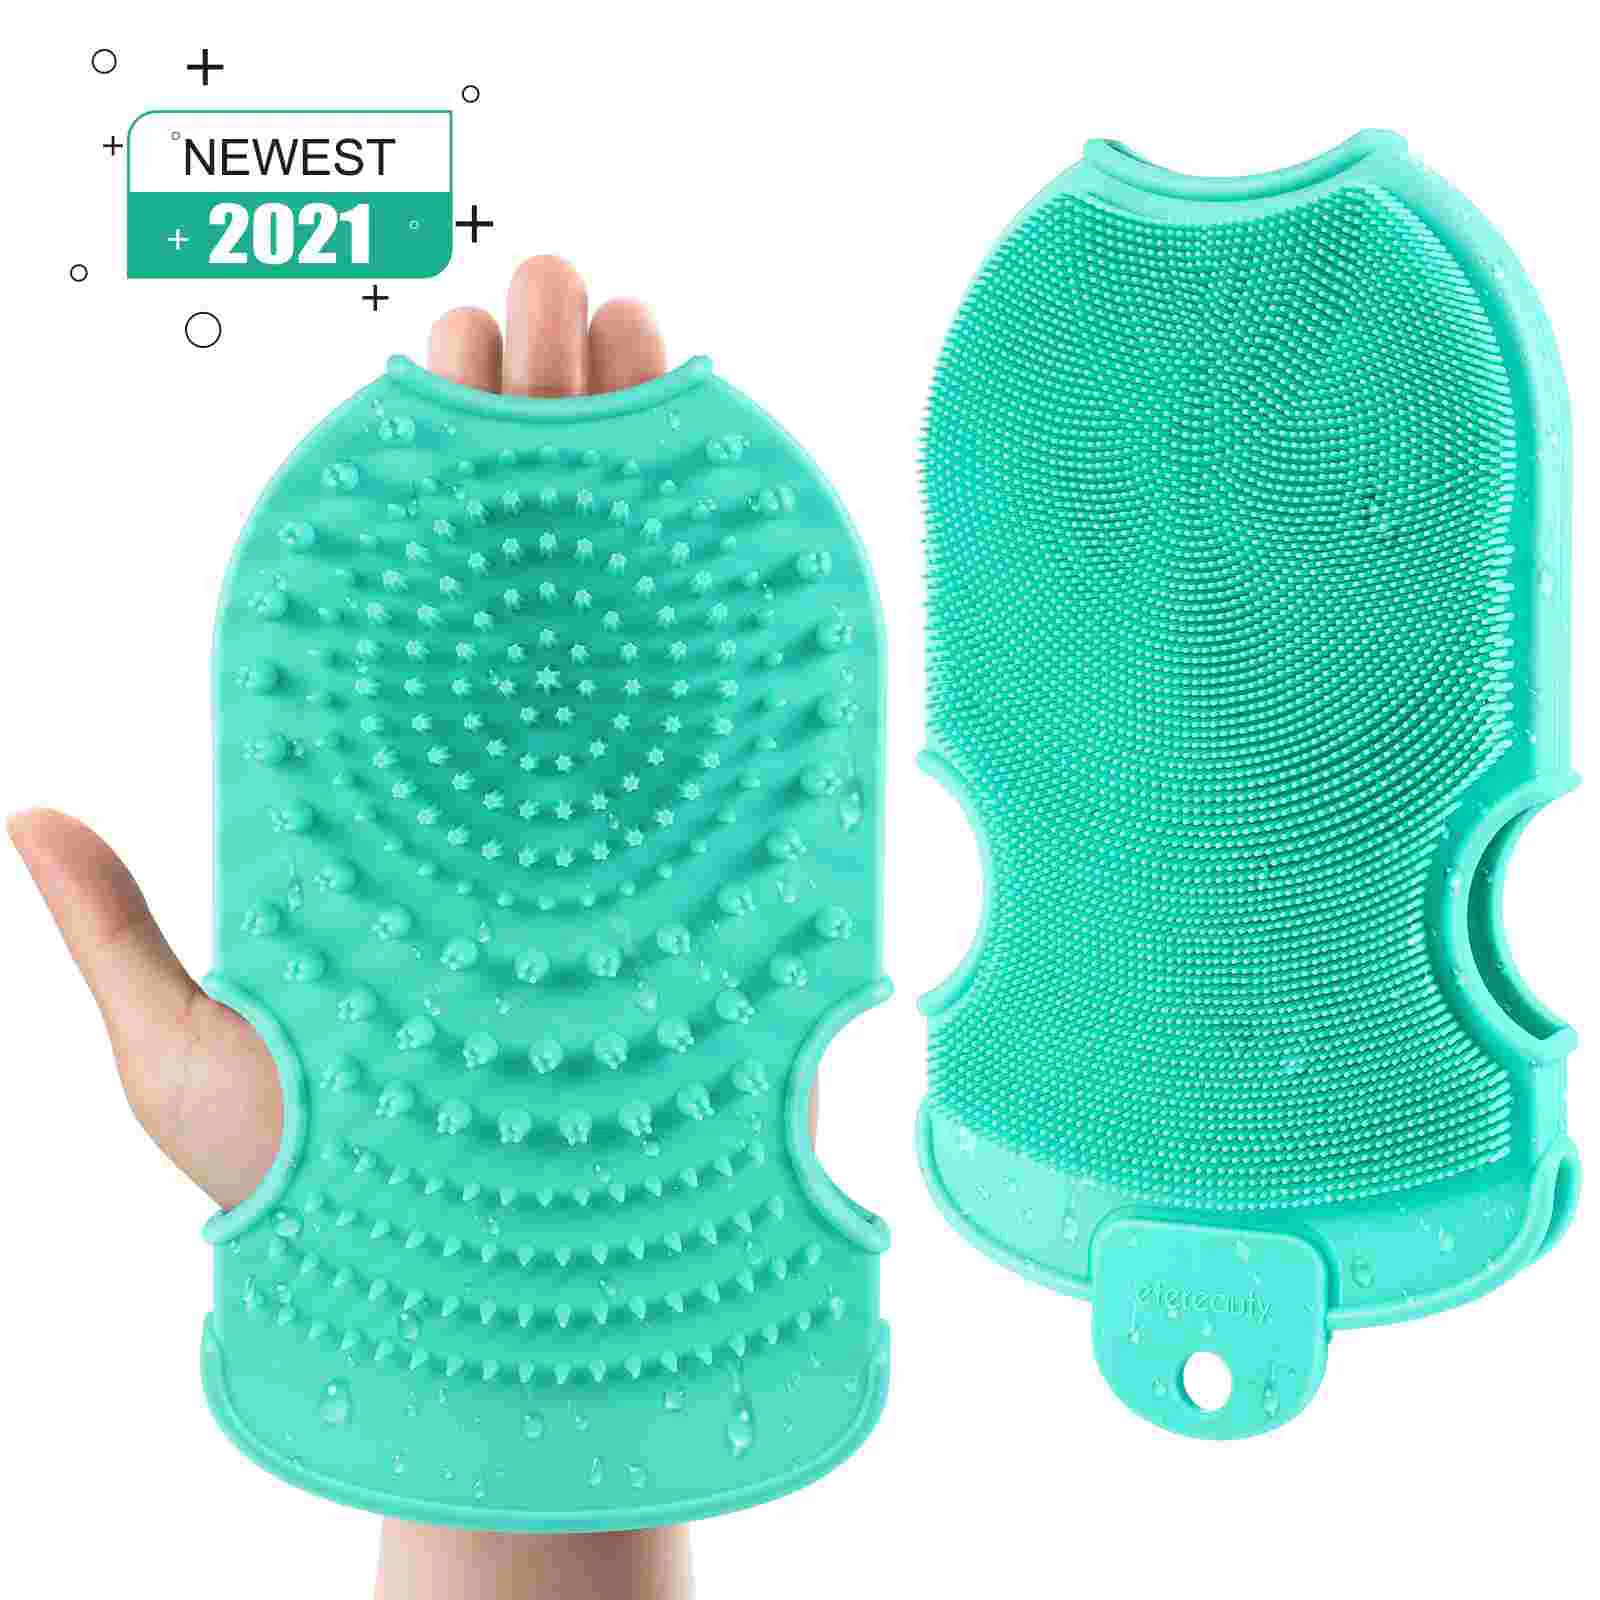 

ETEREAUTY Silicone Body Brush Space Saving Hygienic Double-sided Body Scrubber for Bathing Exfoliating